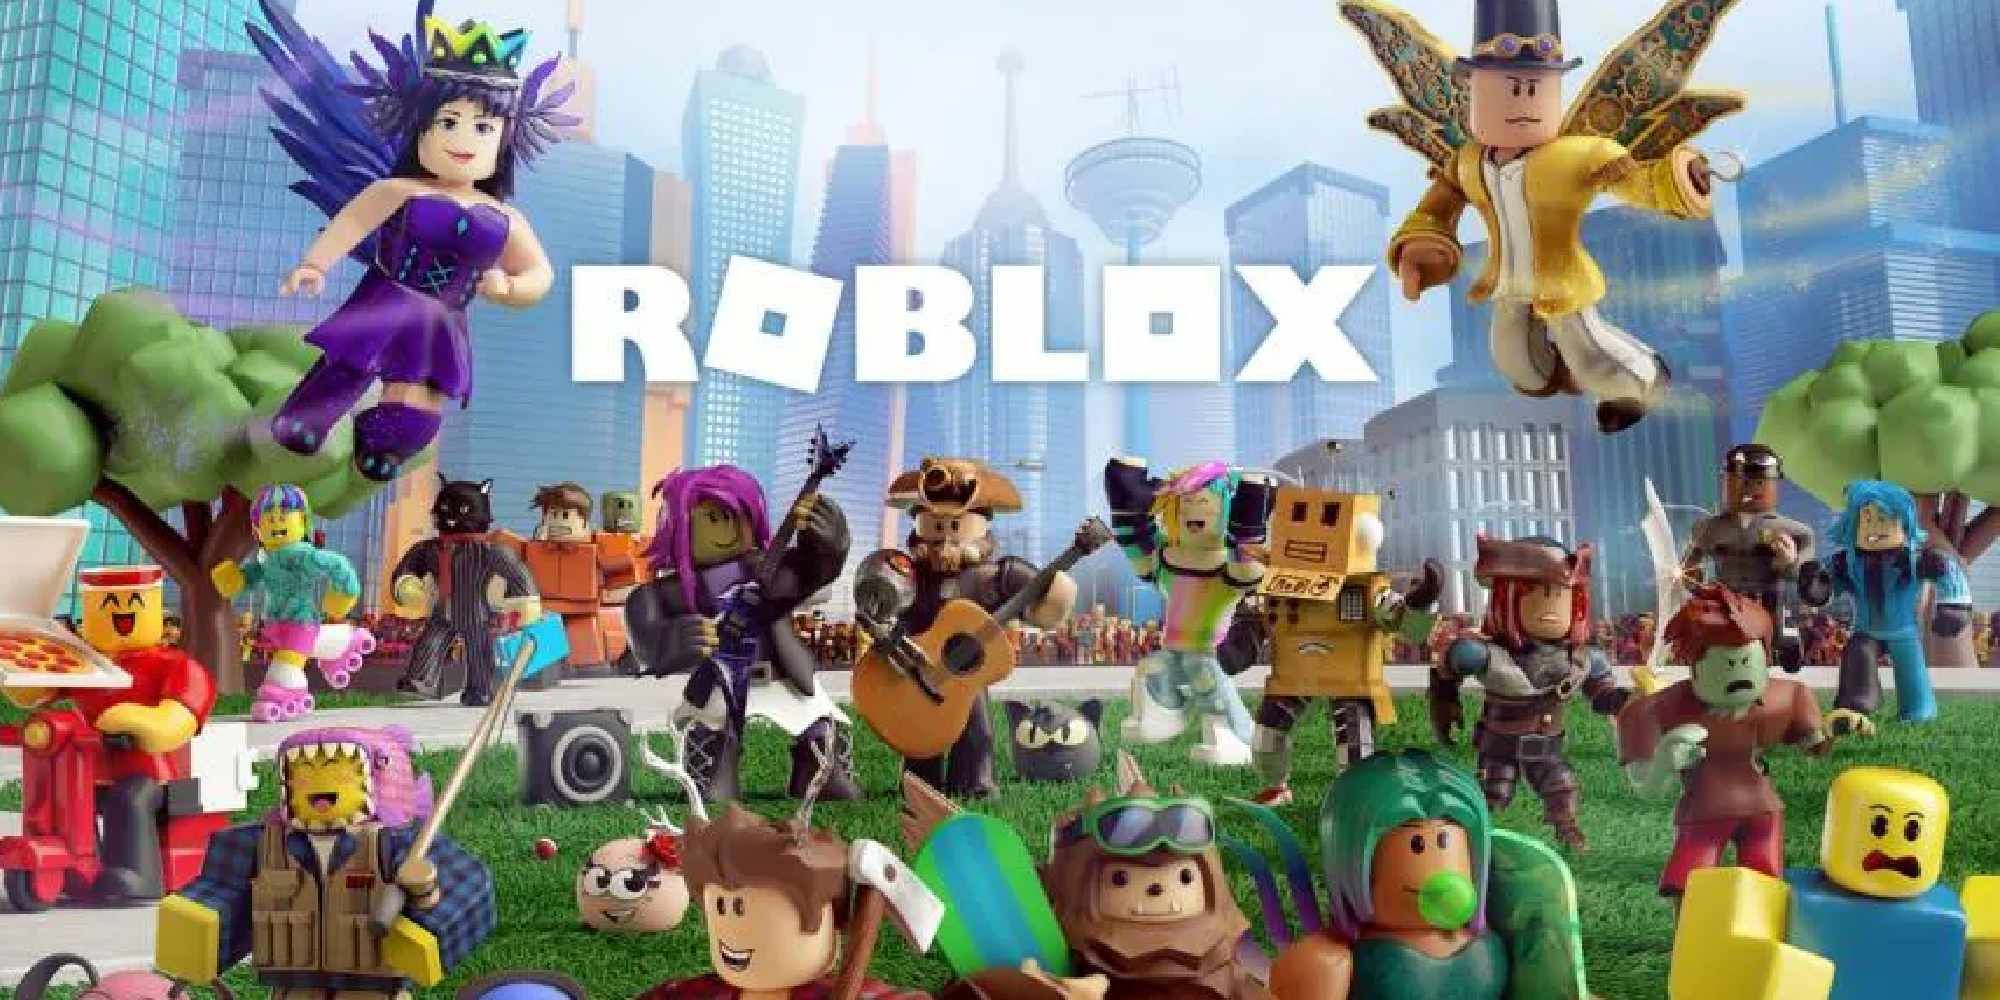 Roblox Game CREATURES OF SONARIA Series Expands with Multi-Platform Content